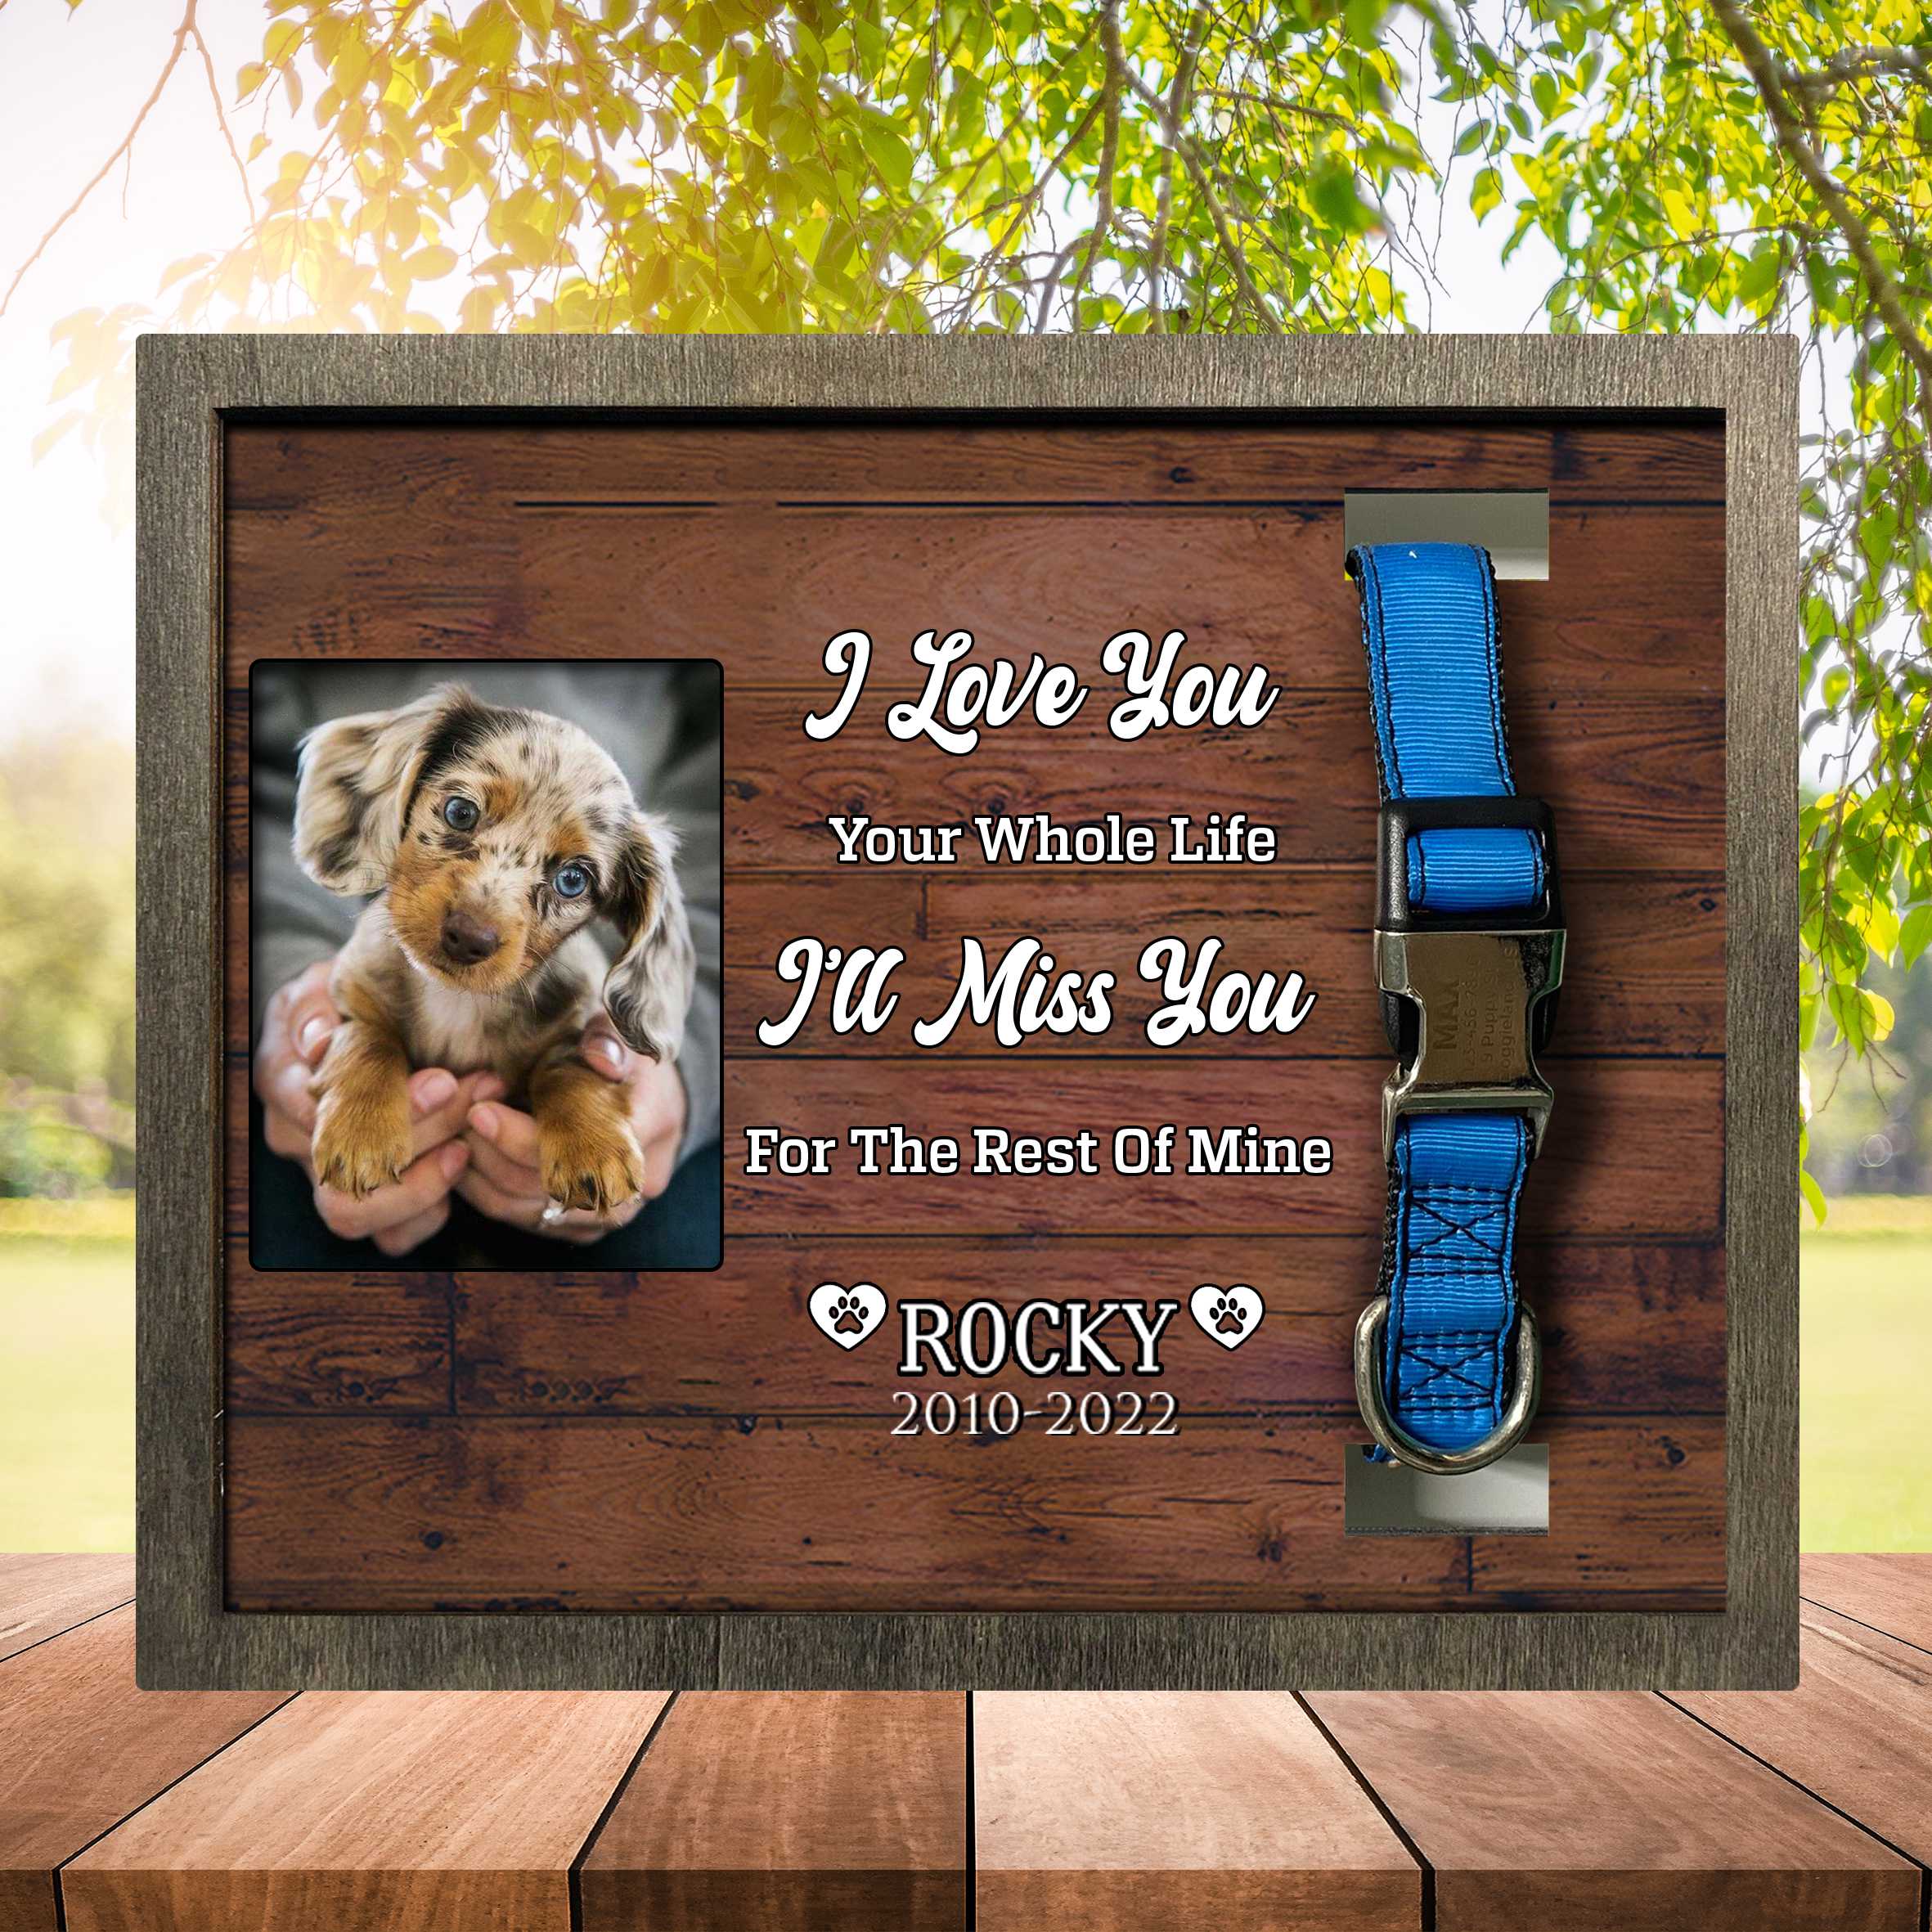 Pet Loss Gifts For Loss Of Dog/ Dog Frames For Pictures Memorial Dog Remembrance/ Sympathy Picture Frame